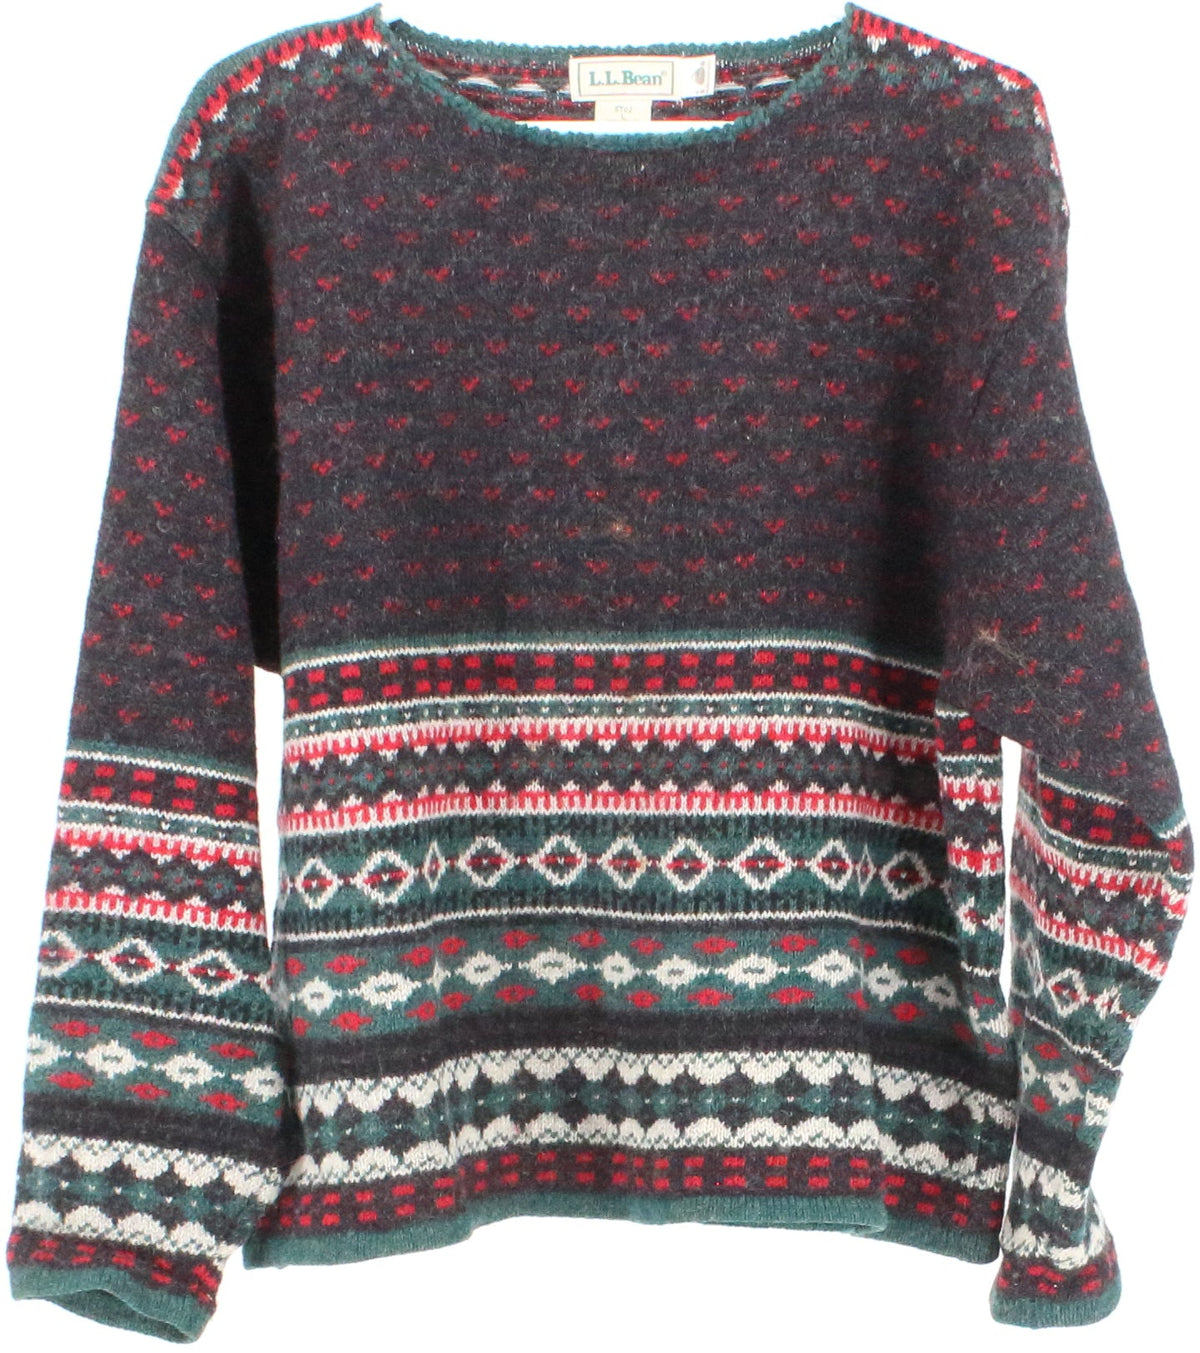 L.L.Bean Black Green and Red Women's Sweater